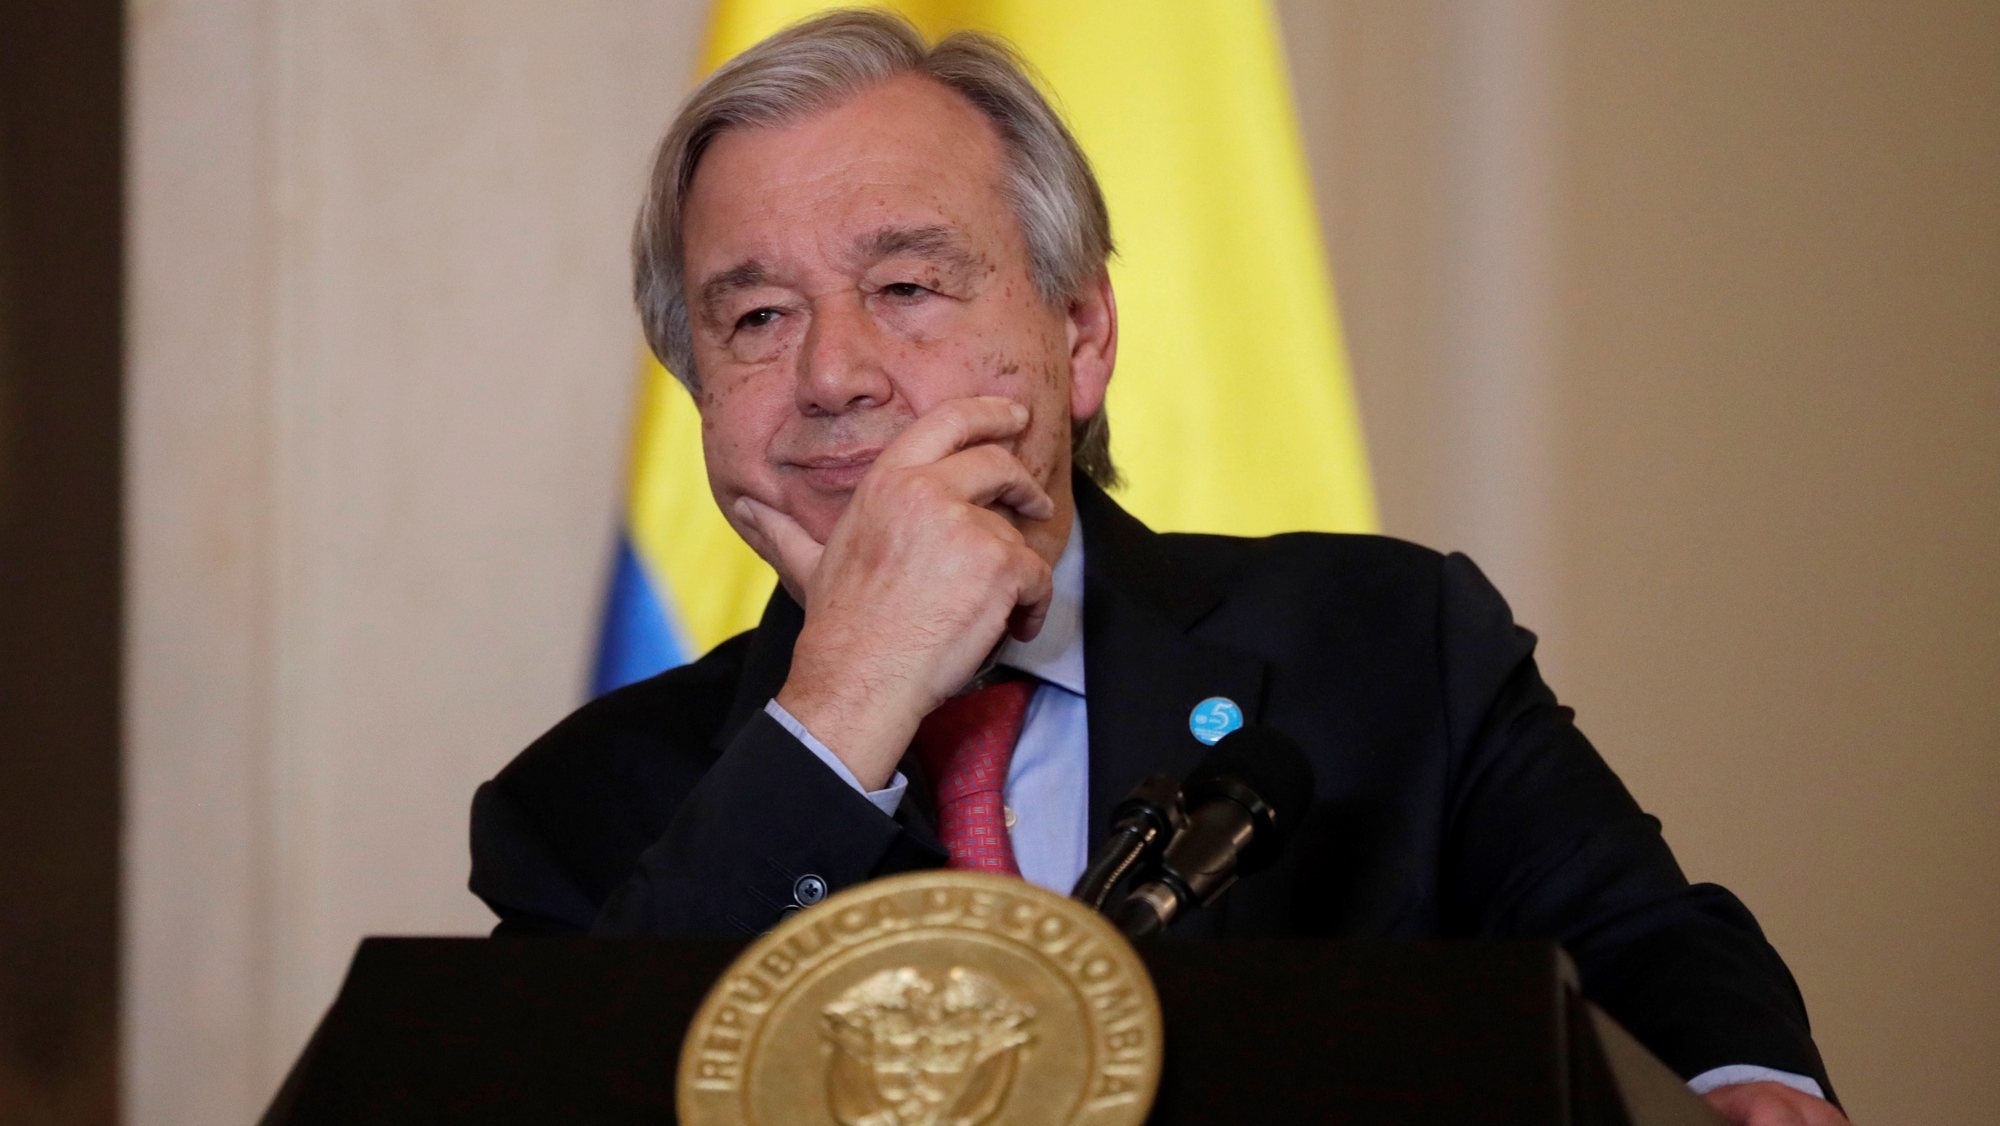 epa09601862 UN Secretary General Antonio Guterres speaks during a press conference  at Casa de Narino in Bogota, Colombia 24 November 2021. Guterres arrived in Colombia on 22 November to participate this week in various events around the anniversary of the signing of the peace agreement between the Colombian government and the former FARC guerrilla, which officially celebrates its fifth anniversary this 24 November. at the headquarters of the Special Jurisdiction for Peace (JEP), the ad hoc court created to try war crimes and crimes against humanity during the conflict.  EPA/Carlos Ortega